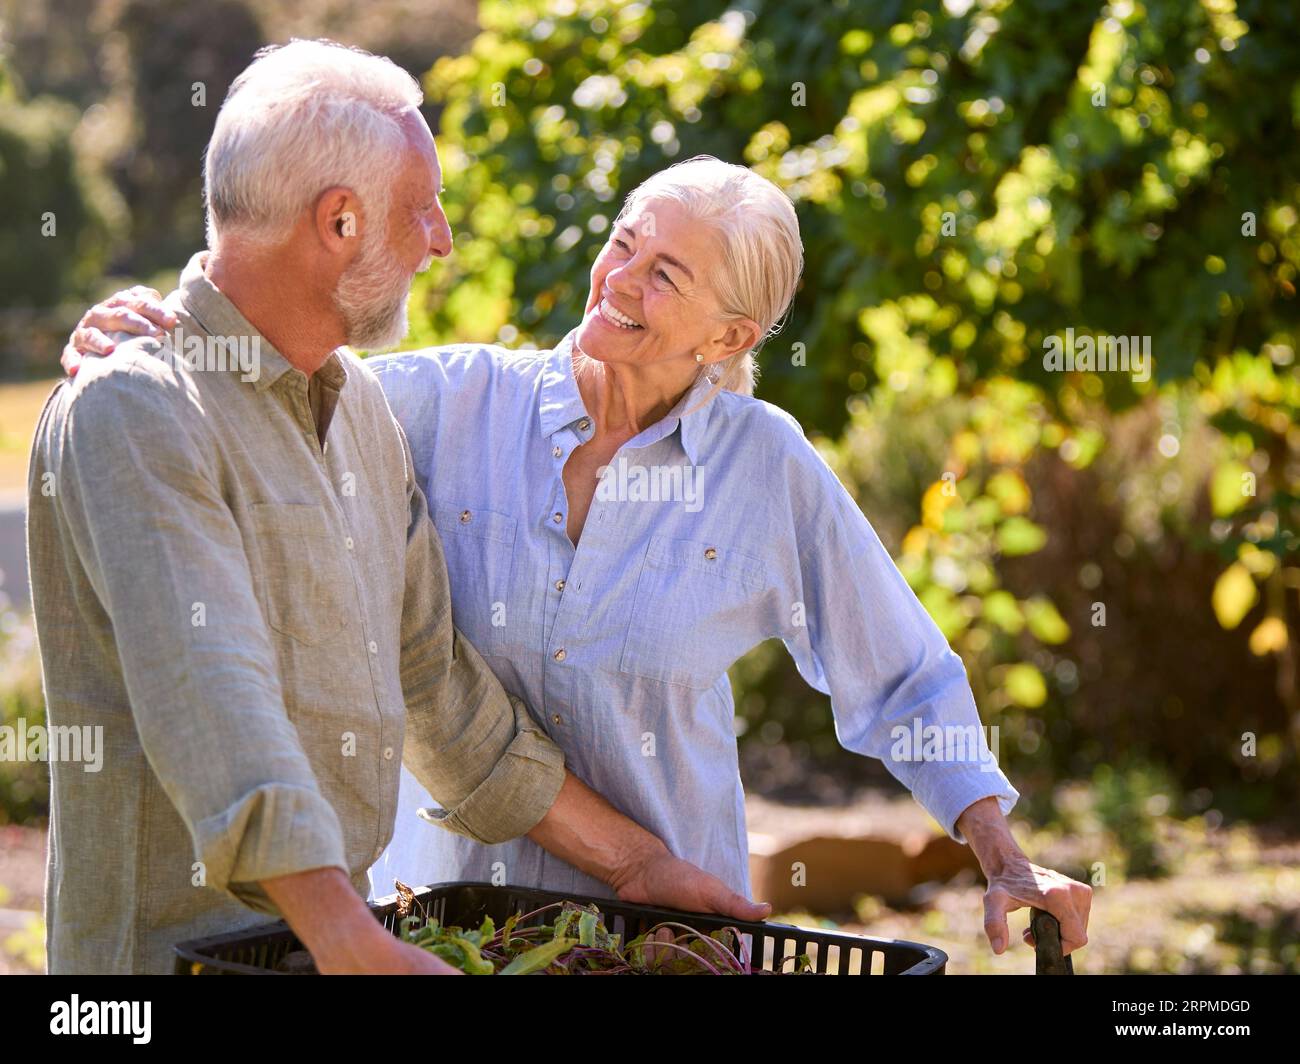 Retired Senior Couple Working In Vegetable Garden Or Allotment Carrying Tray Of Beets Stock Photo